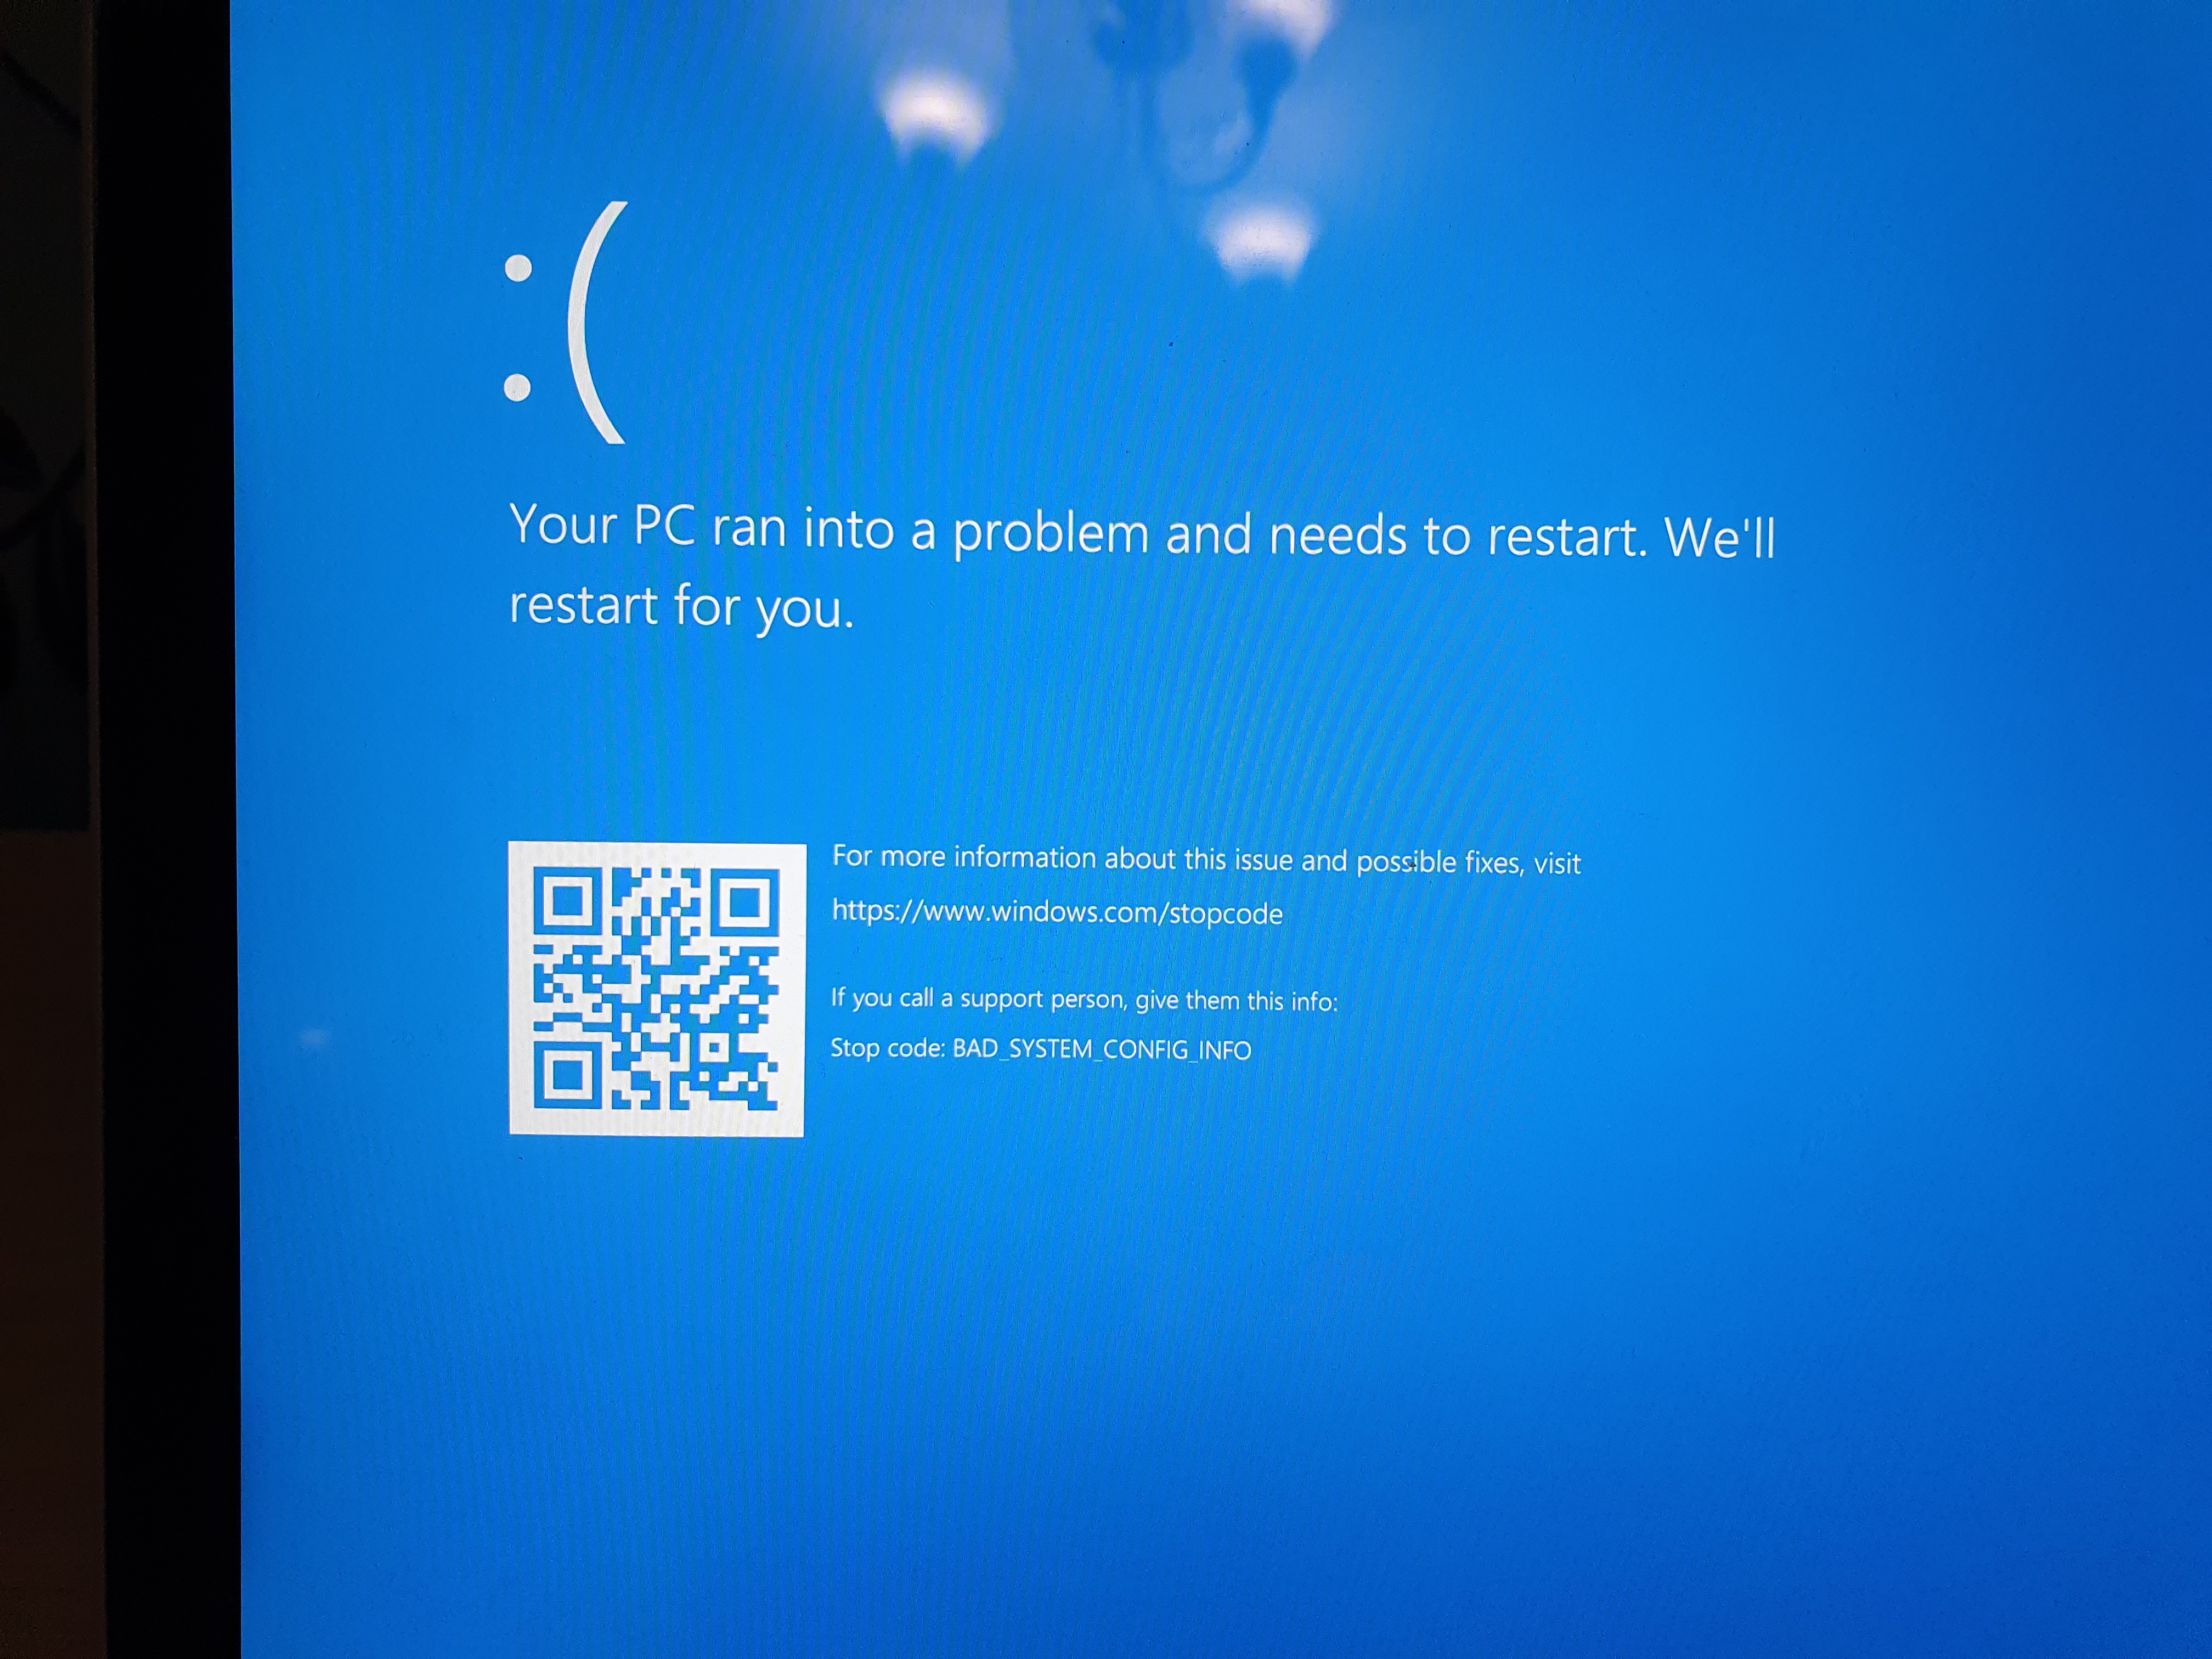 BLUE SCREEN unable to reboot, restore or reset - Microsoft Community